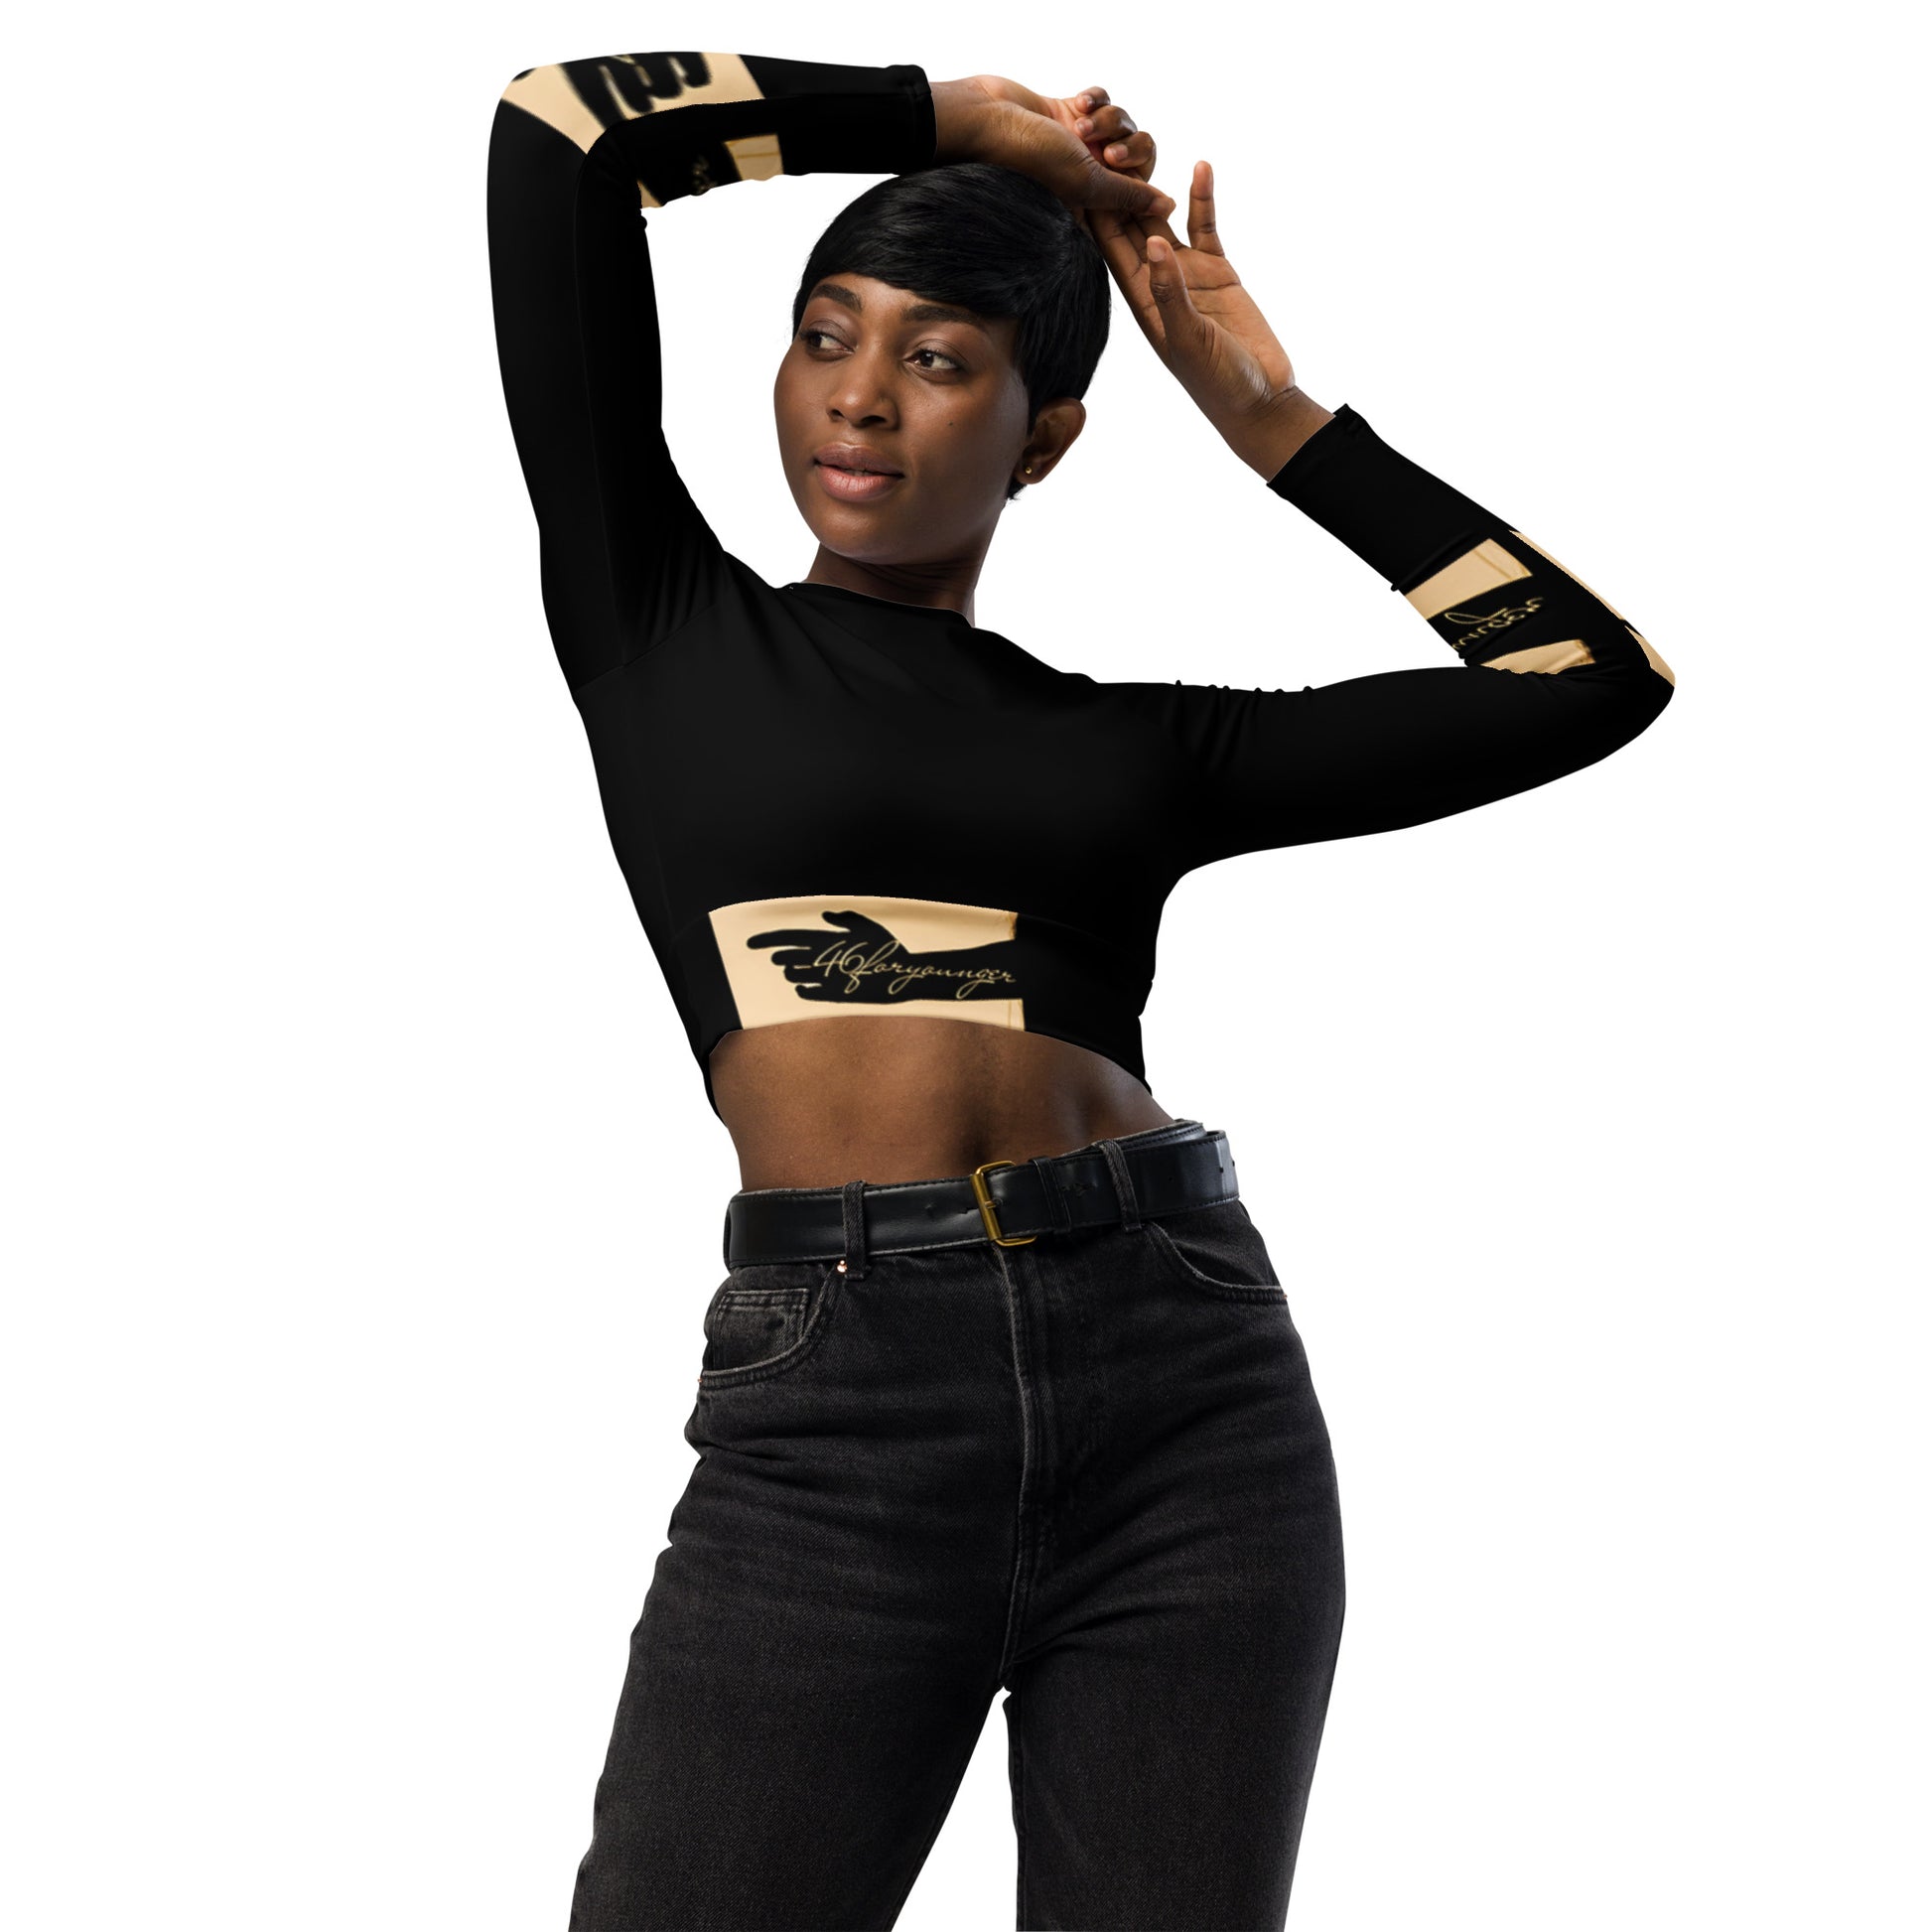 A-Ray of Emotions Long Sleeve Crop Top: Let Your Art Be the Healing Embrace. 